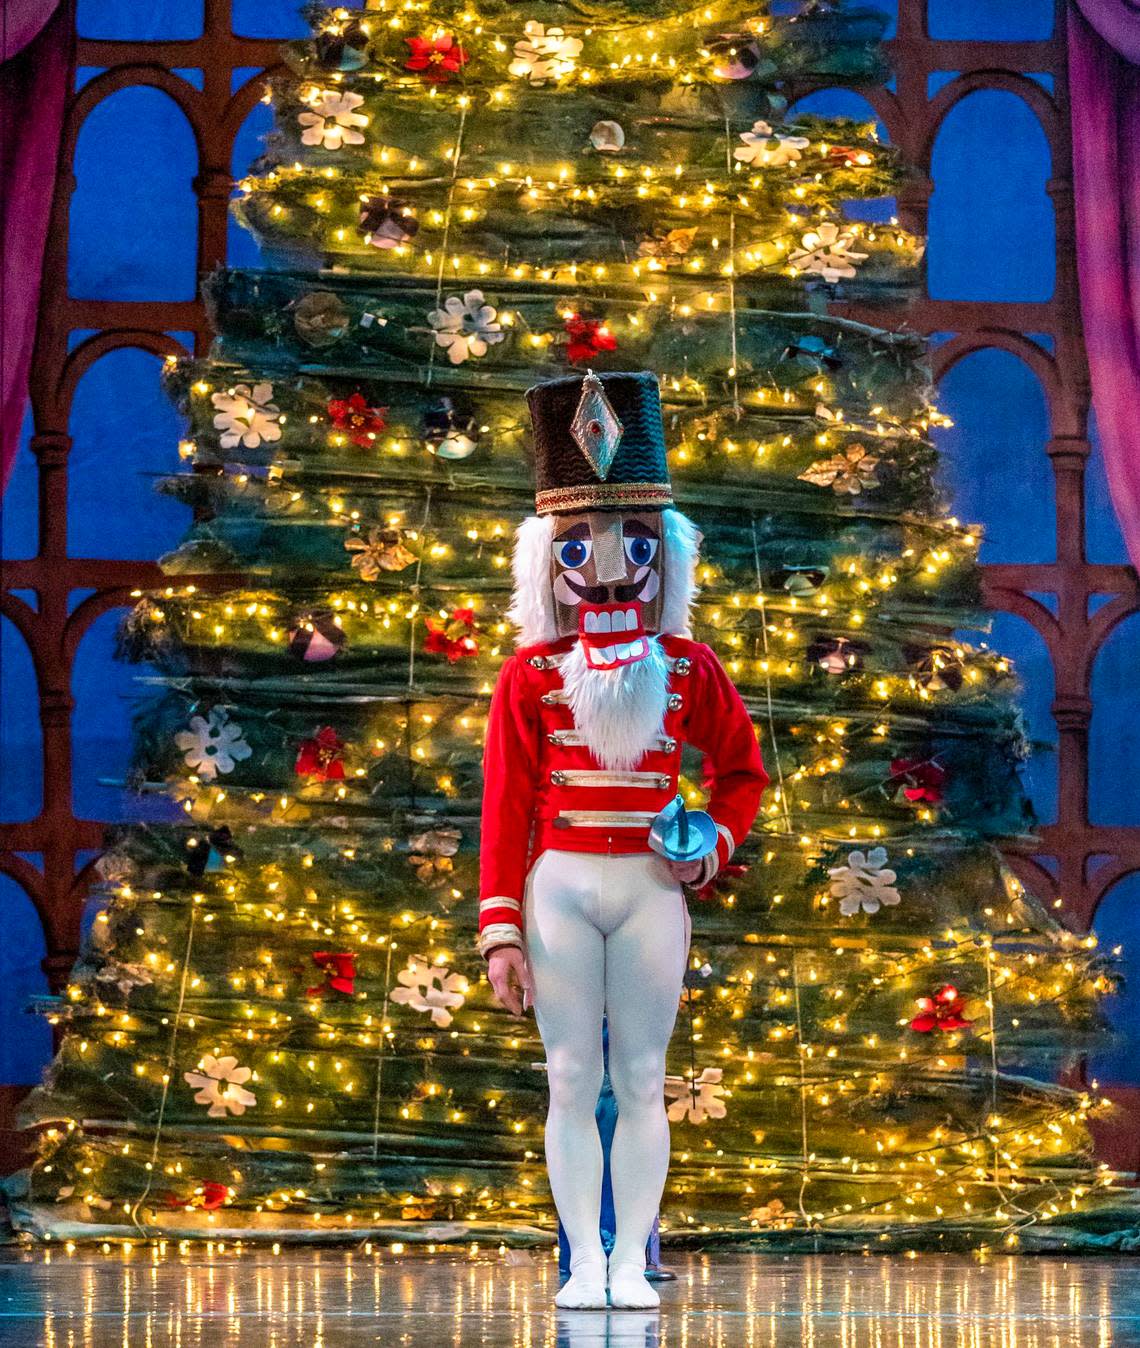 The Lexington Ballet Company will have eight performances of the holiday classic “The Nutcracker” at the Lexington Opera House the next two weekends.